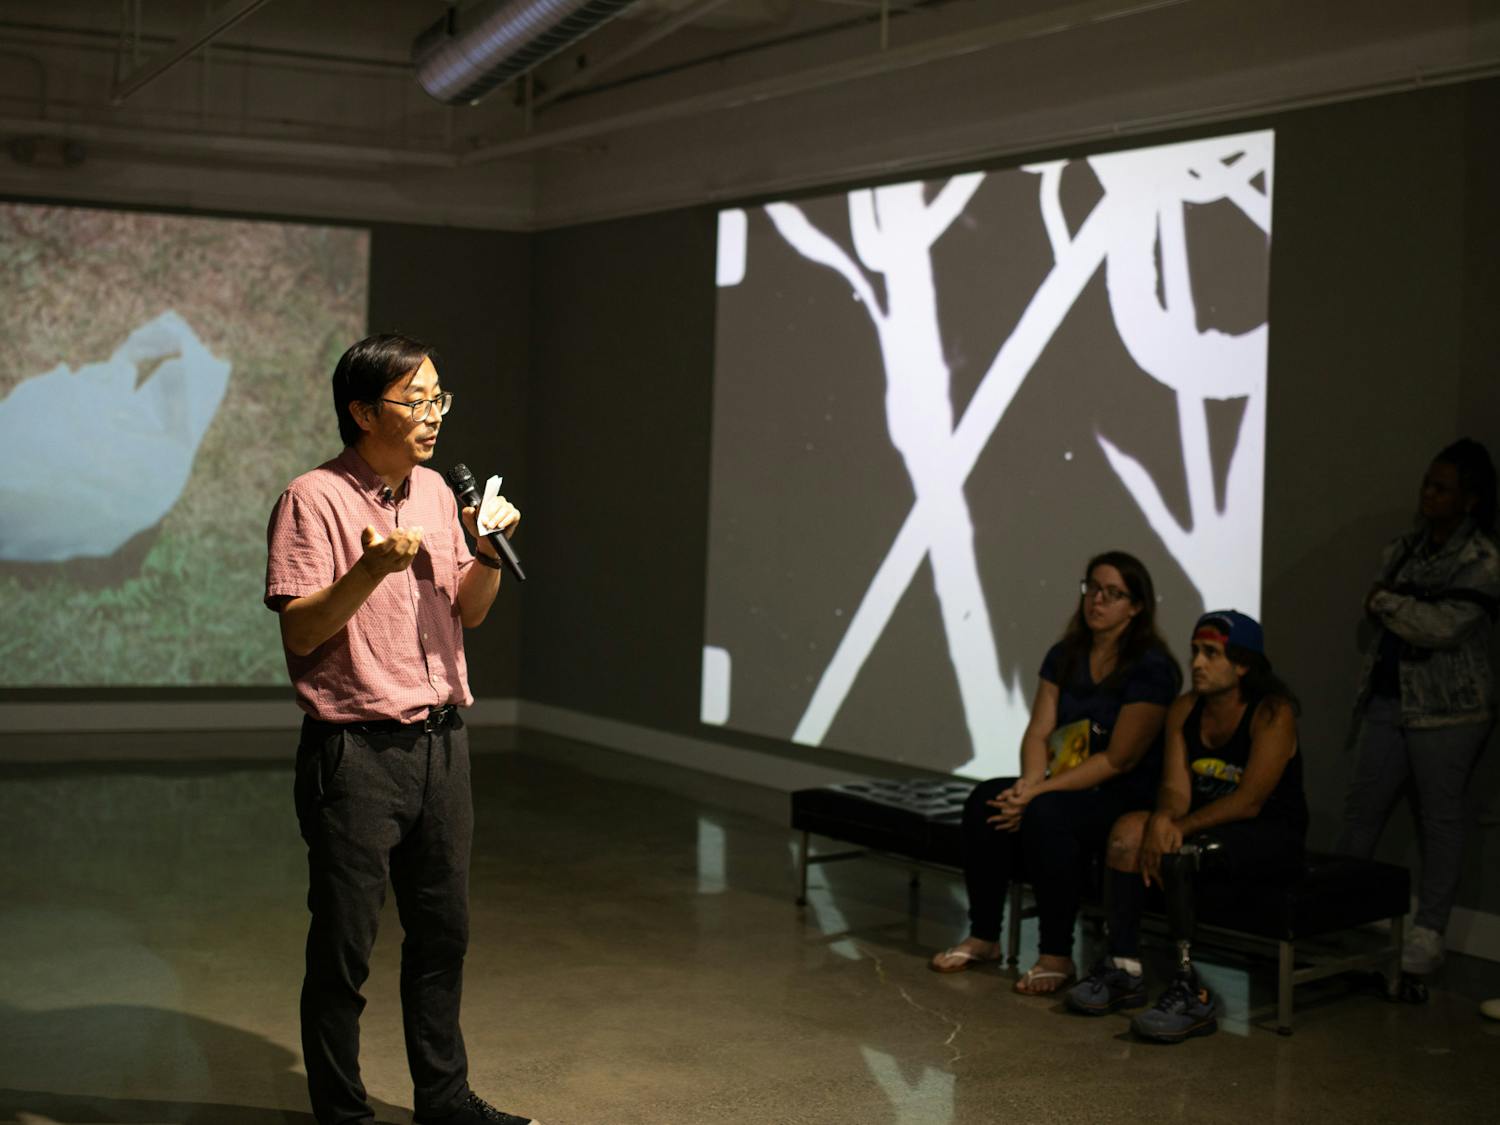 Media artist and UB faculty member Carl Lee discusses his newest project "Unity Island."